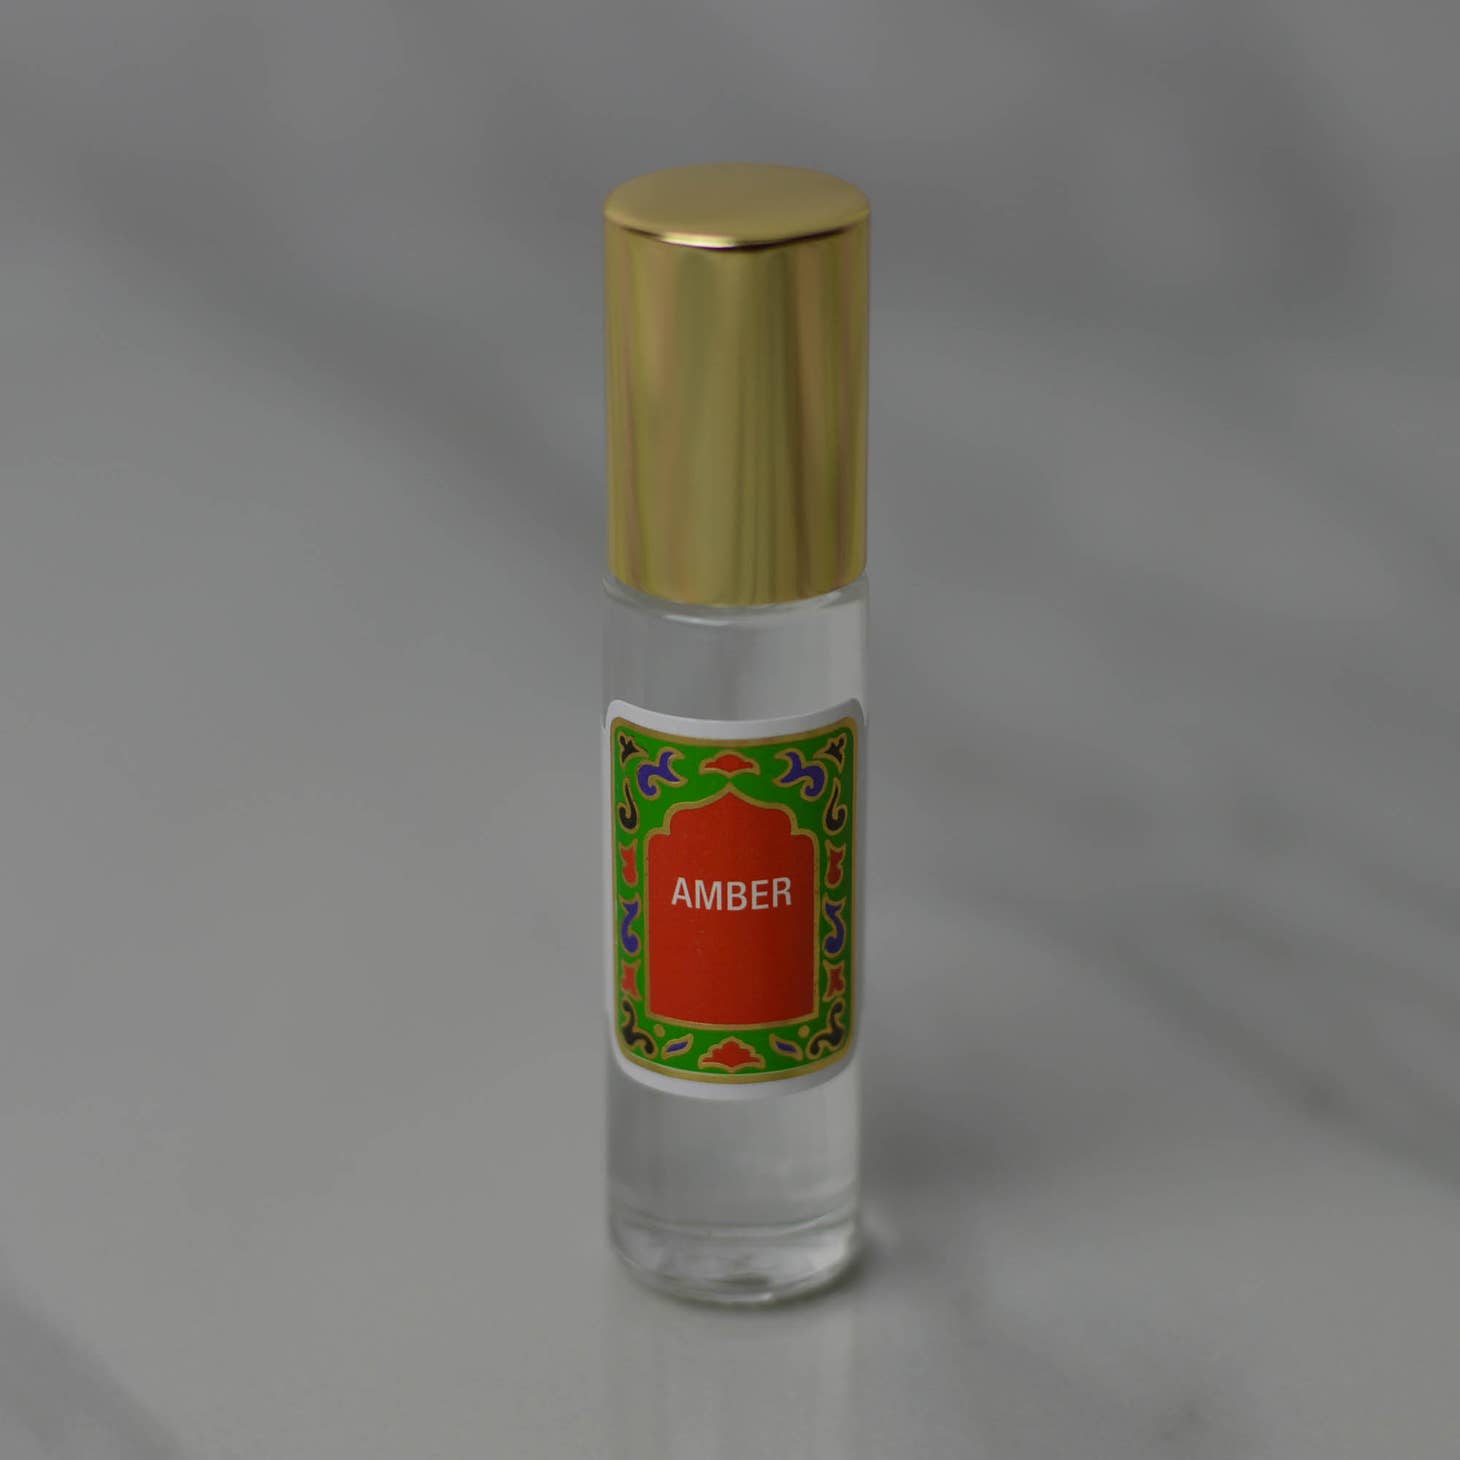 No. 31 Golden Amber Roll-On Perfume